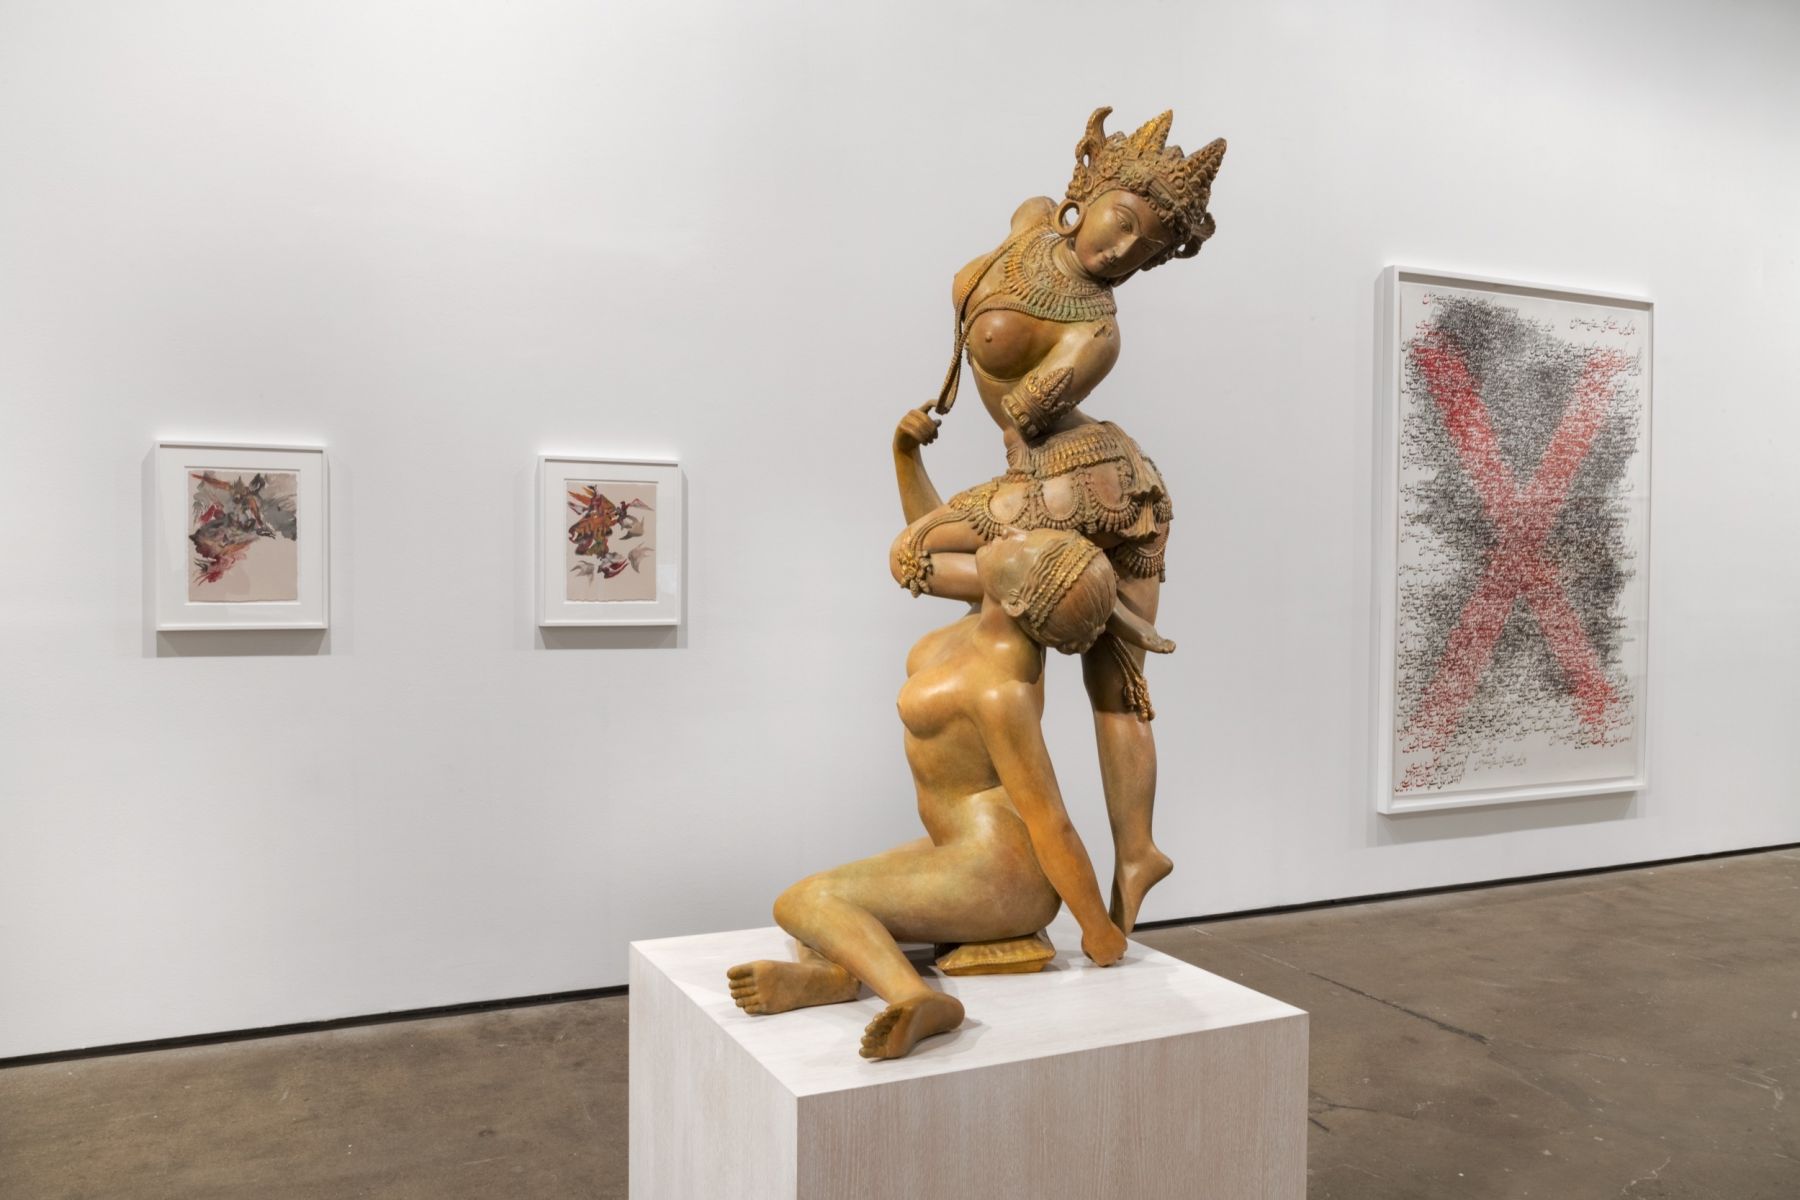 A light brown sculpture of two women, one appearing as a goddess from Southeast Asia, is on display in the middle of a contemporary gallery space. On the wall behind it three abstract paintings hang.